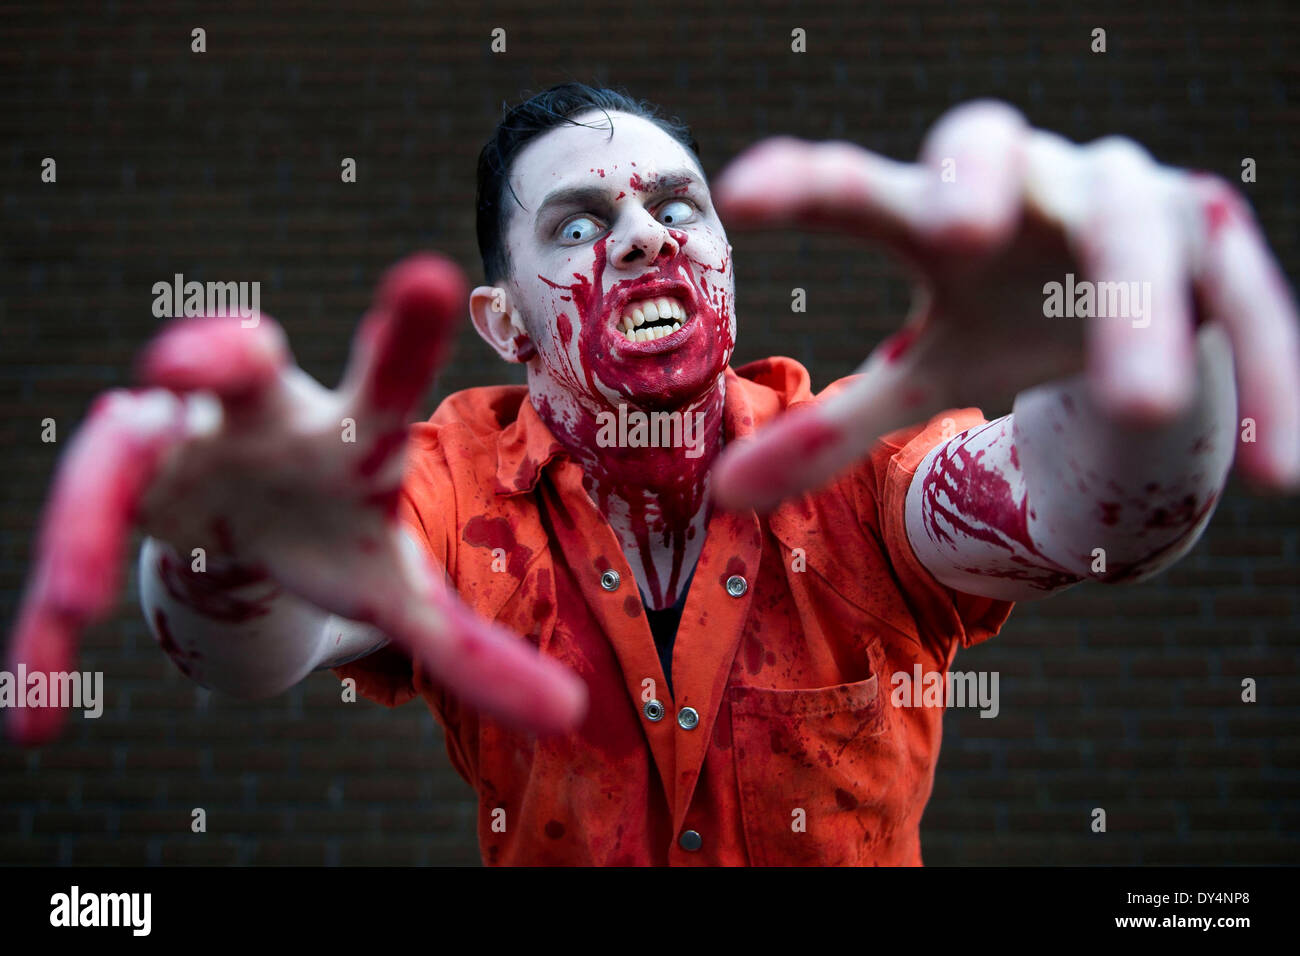 A frightening zombie covered in blood Stock Photo